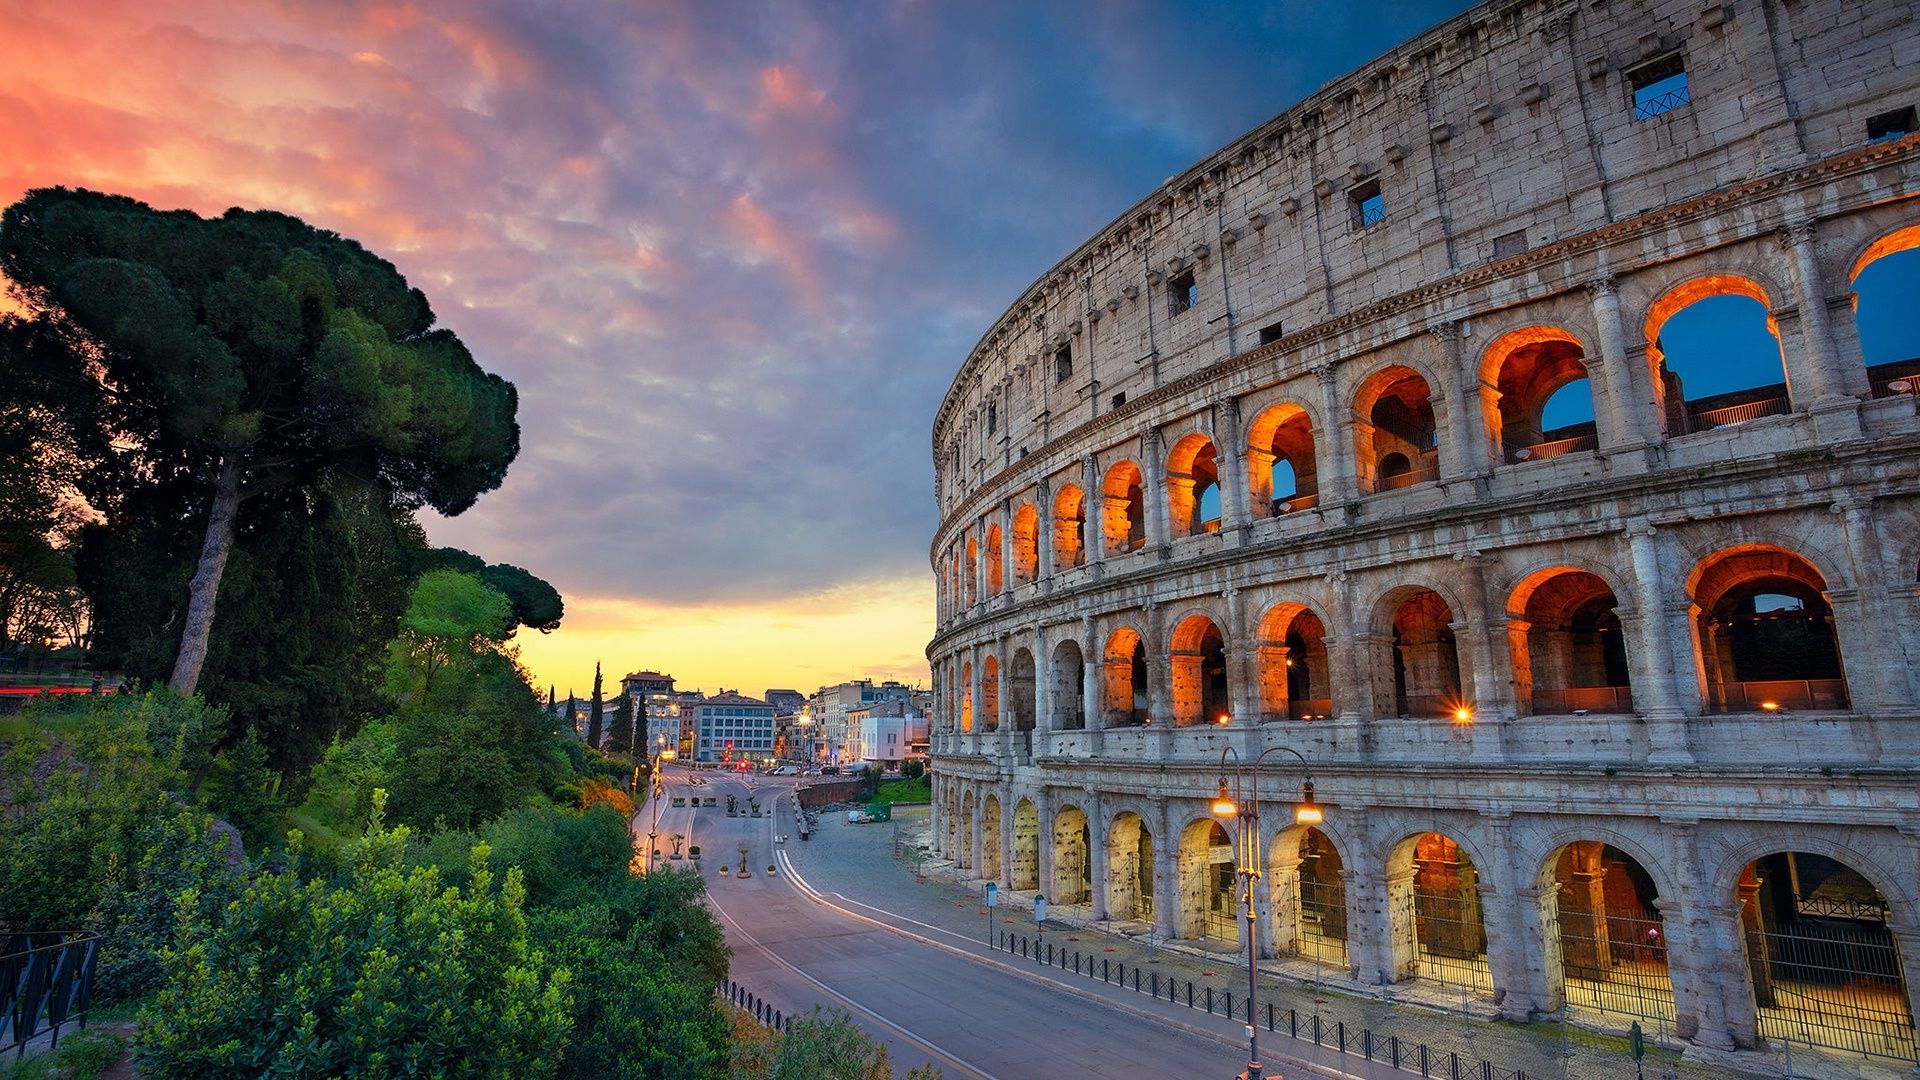 Wallpaper of Colosseum, Rome, City background & HD image